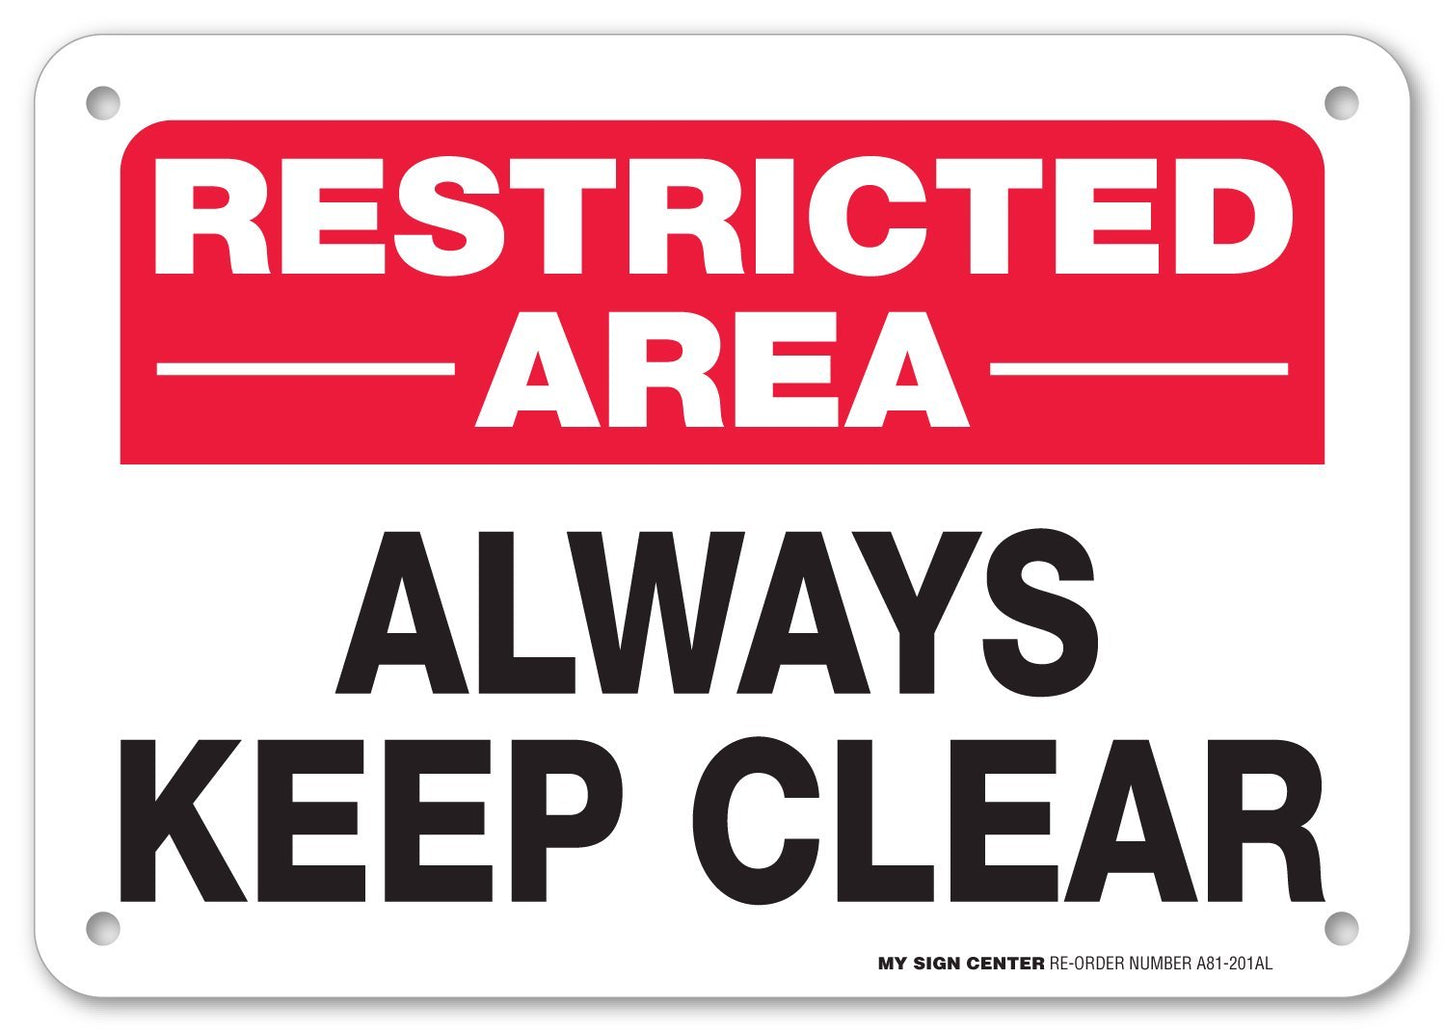 Restricted Area Always Keep Clear No Trespassing Sign by My Sign Center